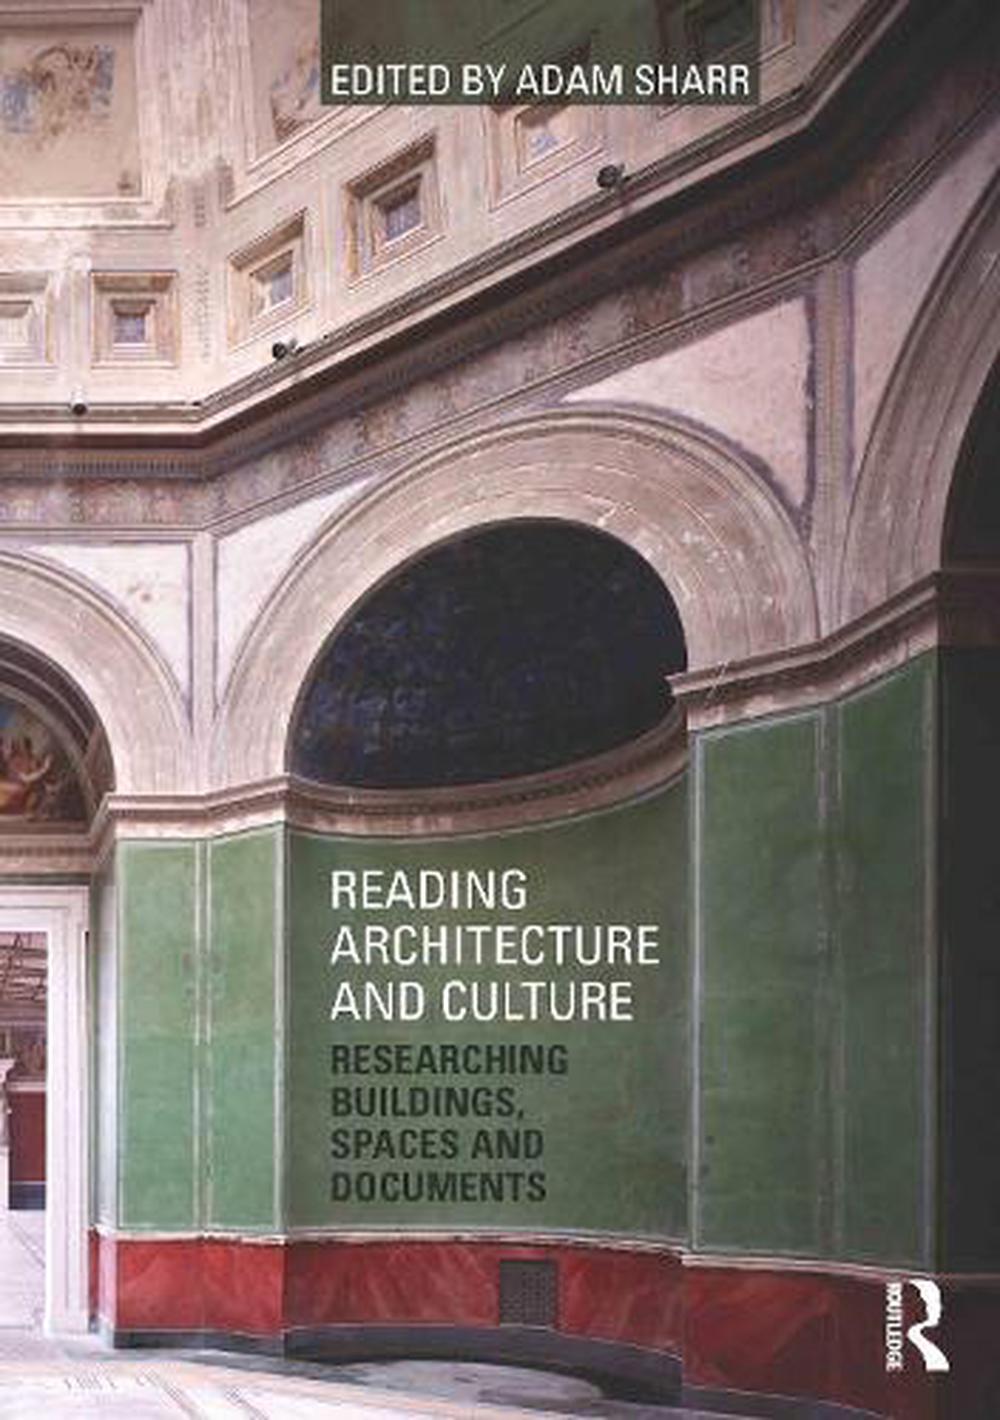 9780415601436　Paperback,　Reading　The　Buy　online　Adam　and　Architecture　by　Culture　Sharr,　at　Nile